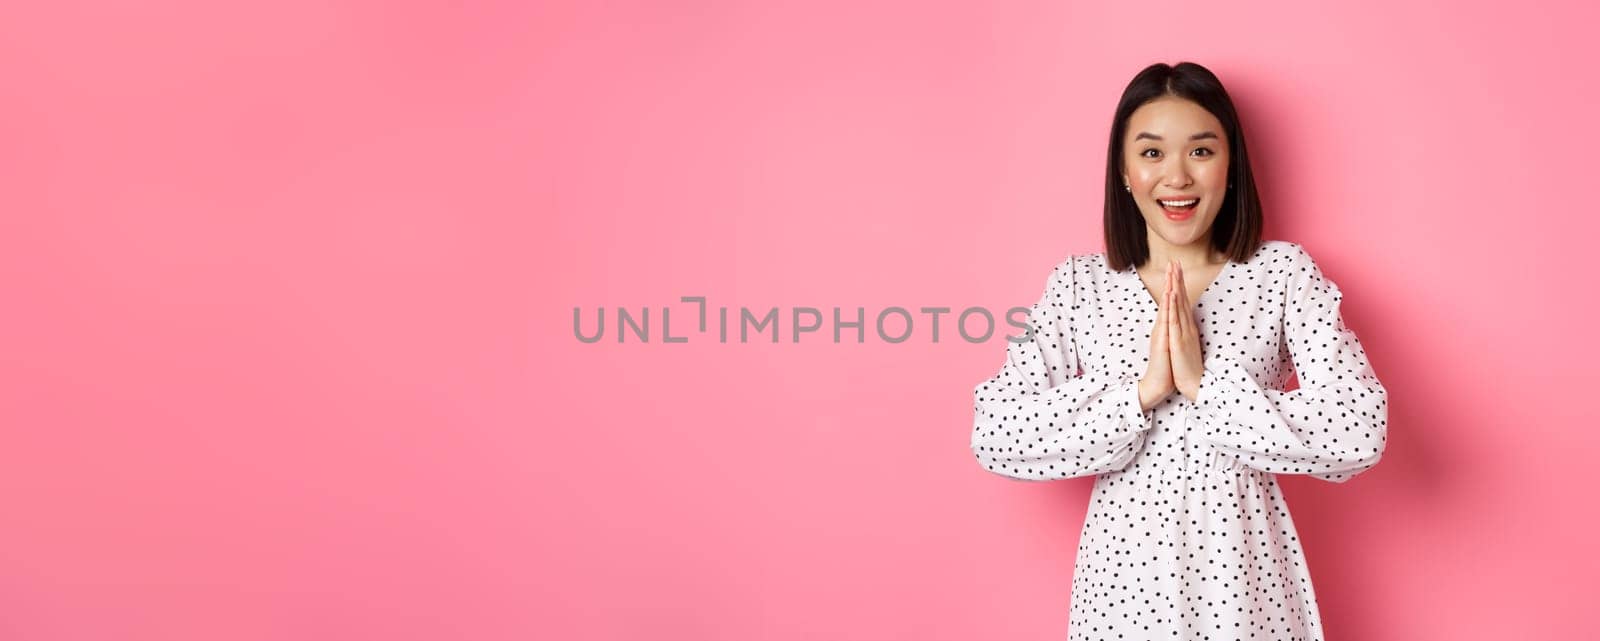 Beautiful asian woman thanking you, holding hands together in appreciation gesture, smiling happy at camera, standing grateful over pink background.